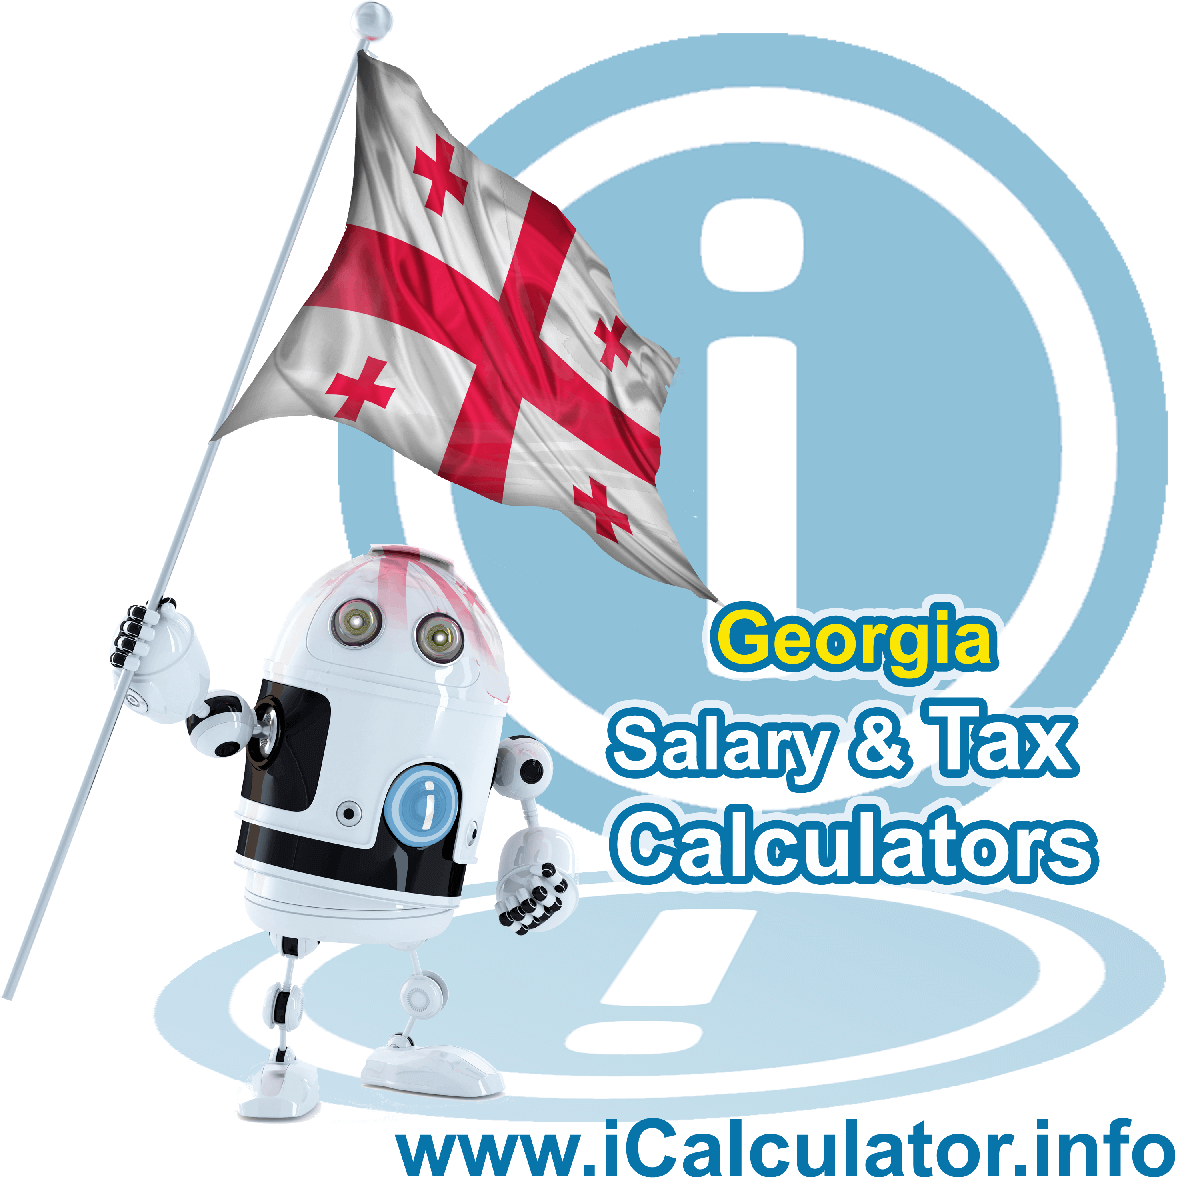 Georgia Tax Calculator. This image shows the Georgia flag and information relating to the tax formula for the Georgia Salary Calculator